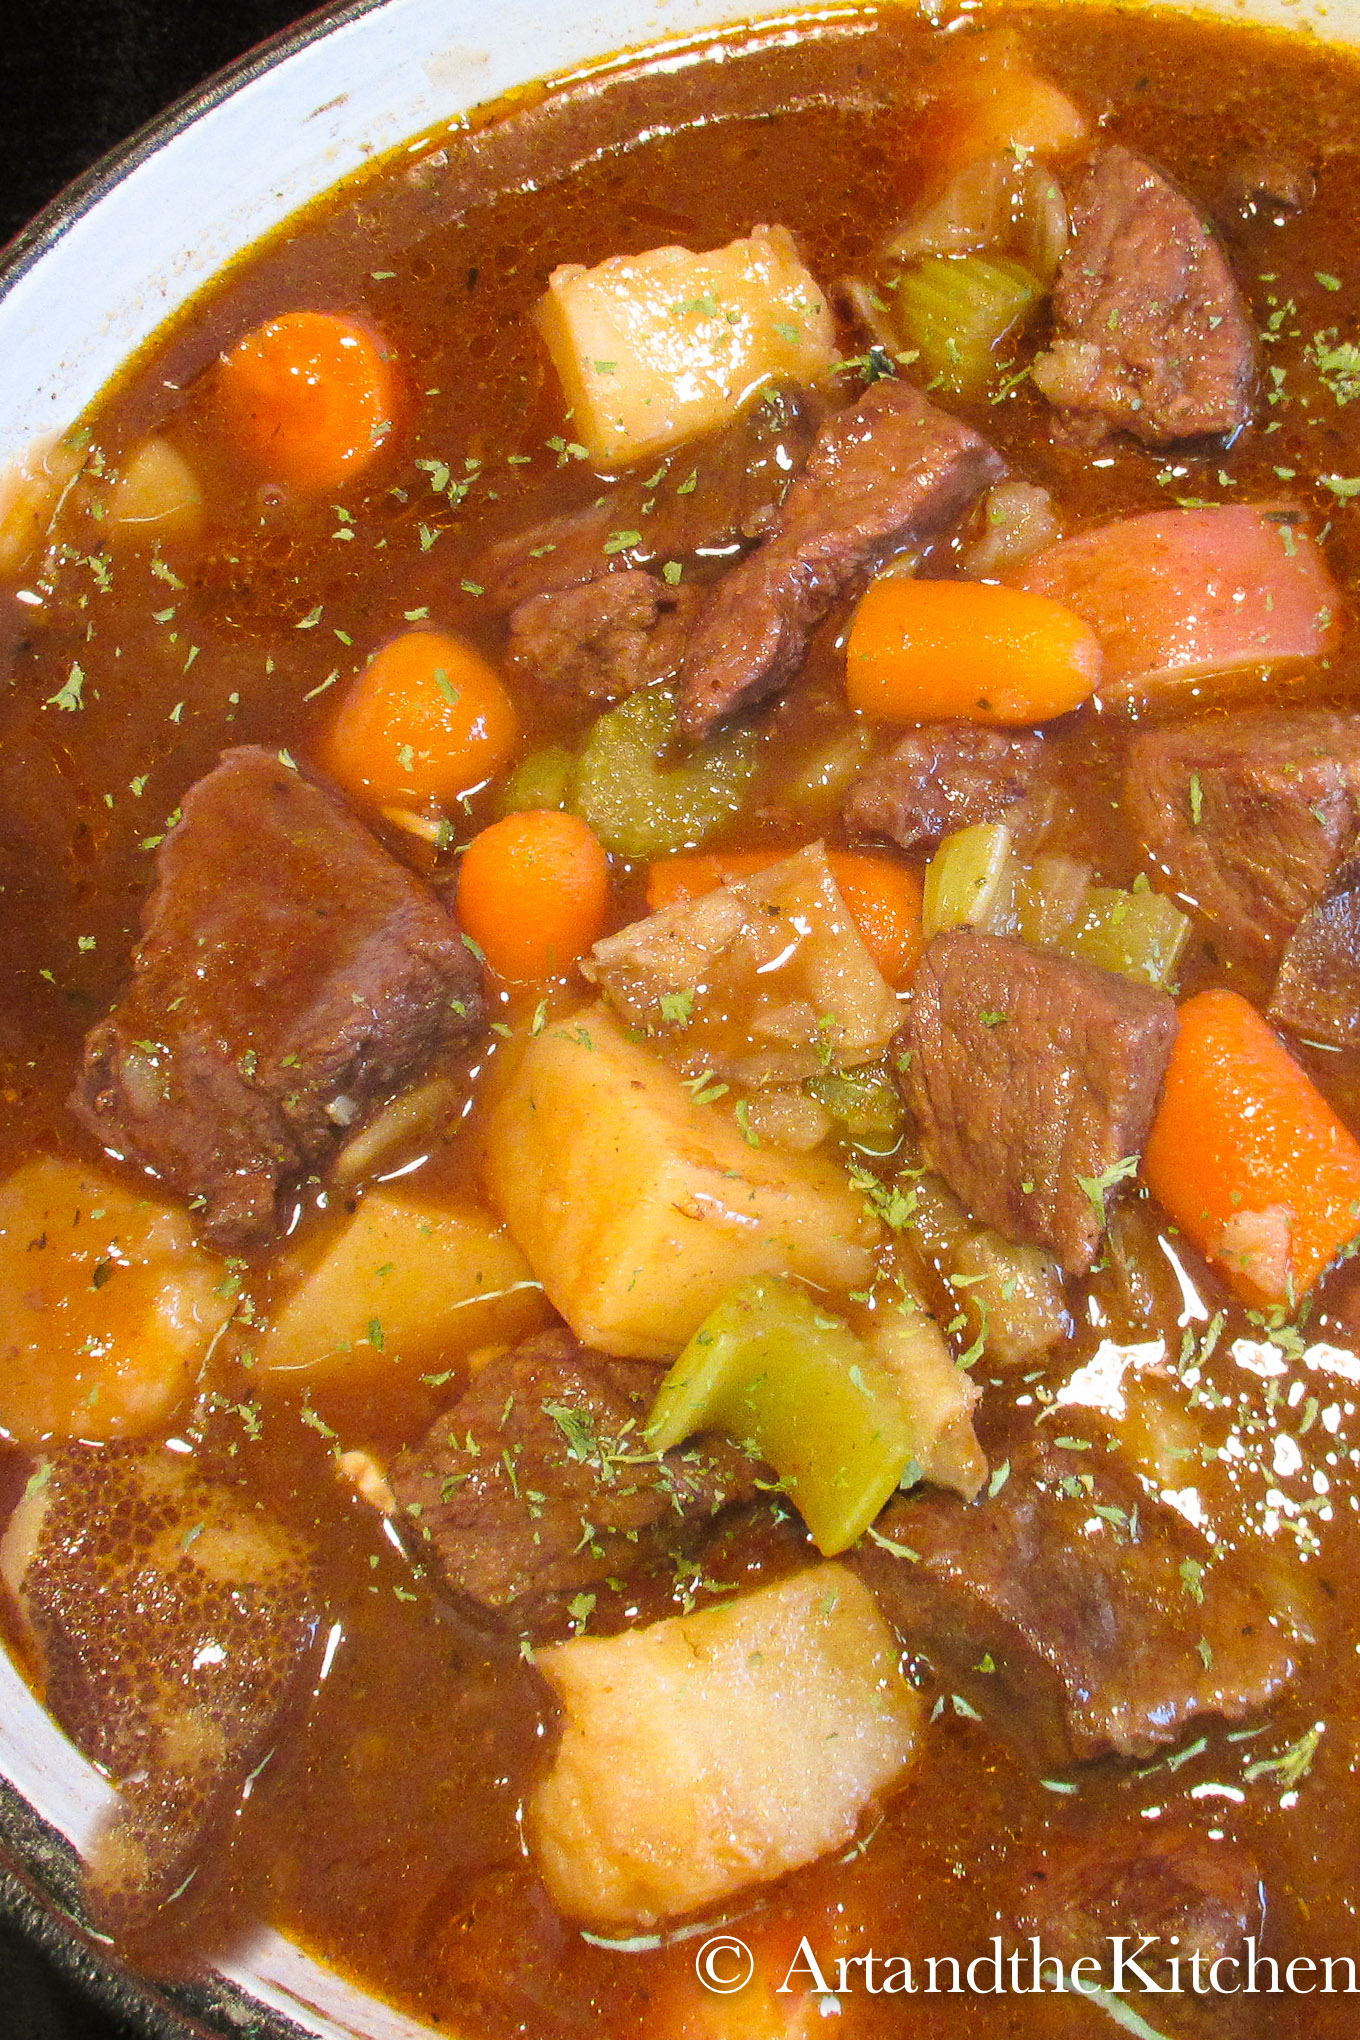 A saucy Irish stew of beef and vegetables in a cast iron pot